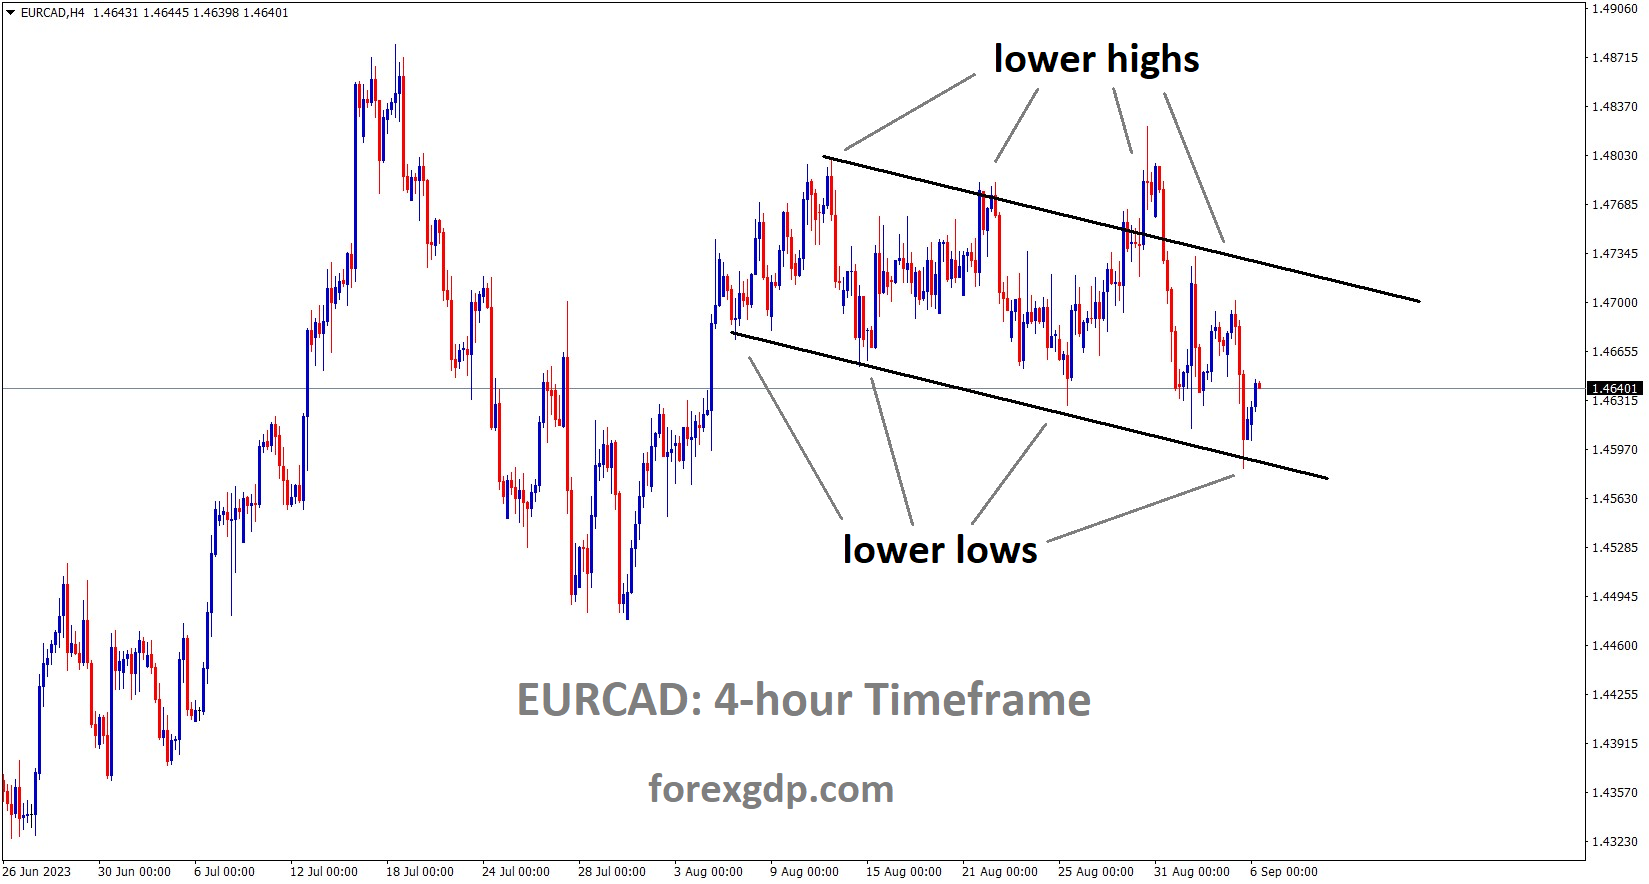 EURCAD H4 TF Analysis Market is moving in the Descending channel and the market has rebounded from the lower low area of the channel